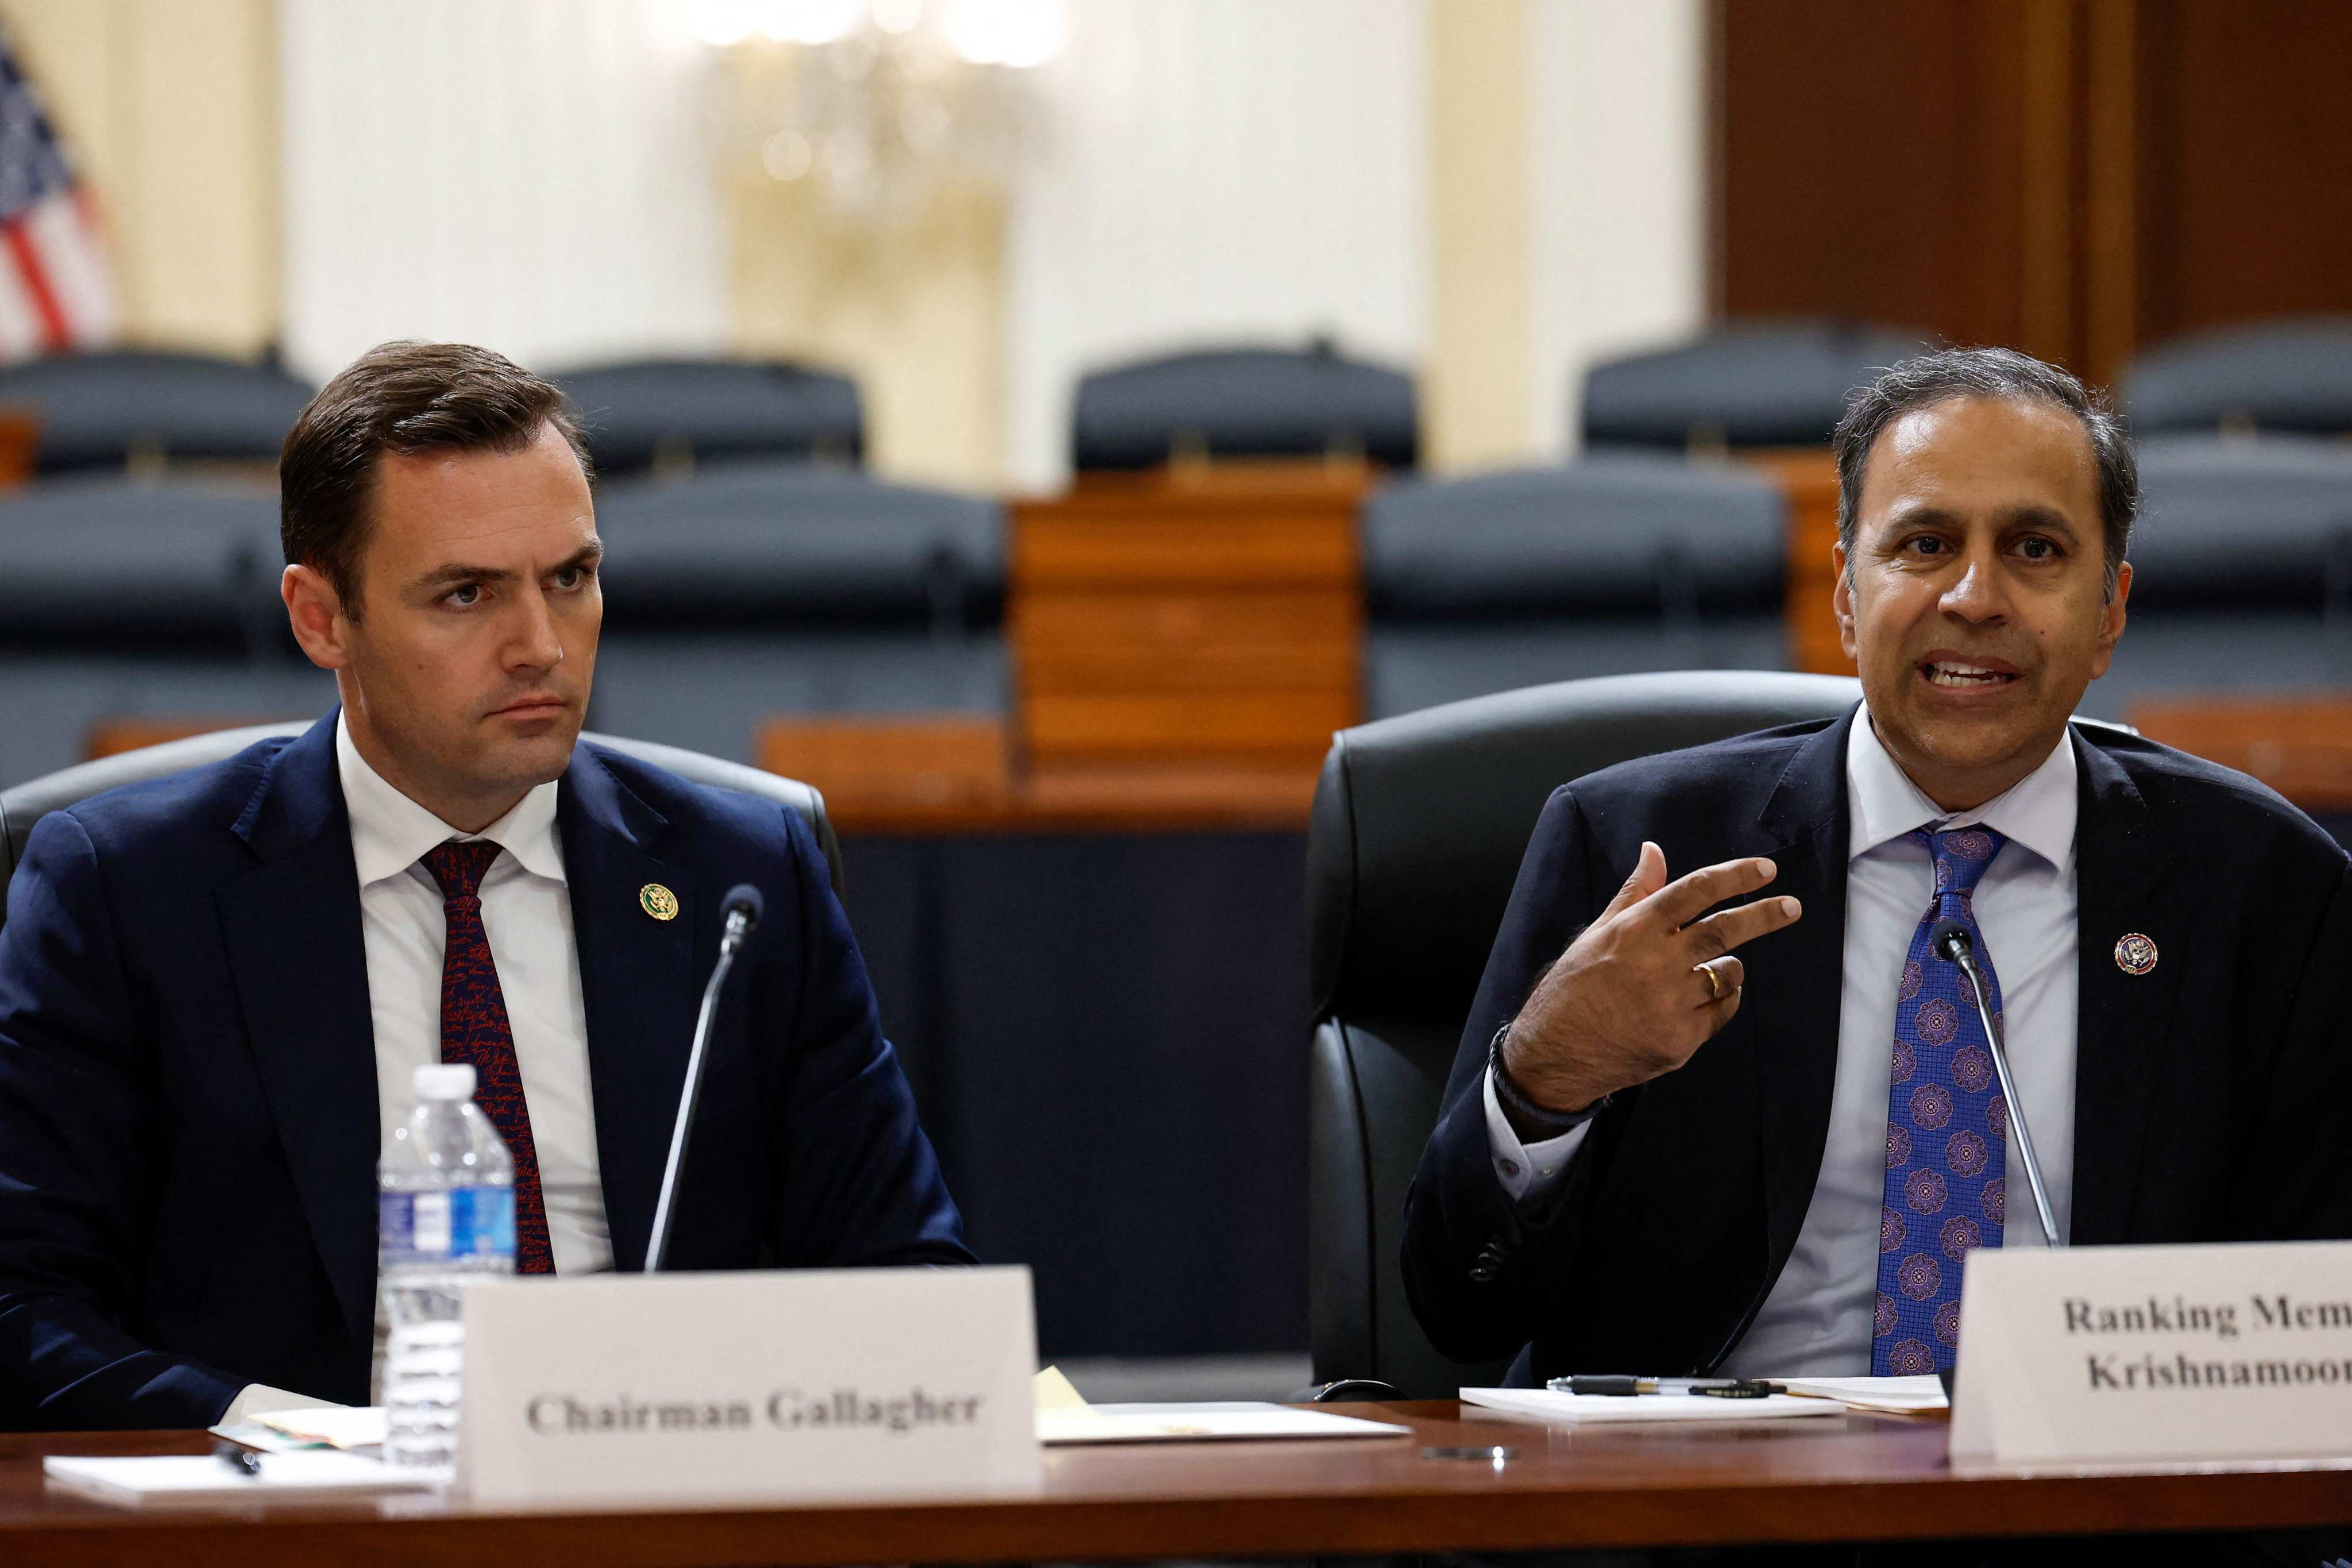 Republican congressman Mike Gallagher of Wisconsin (left) chairs the US House select committee on China. Democratic congressman Raja Krishnamoorthi of Illinois (right) is its ranking member. Photo: Getty Images via AFP